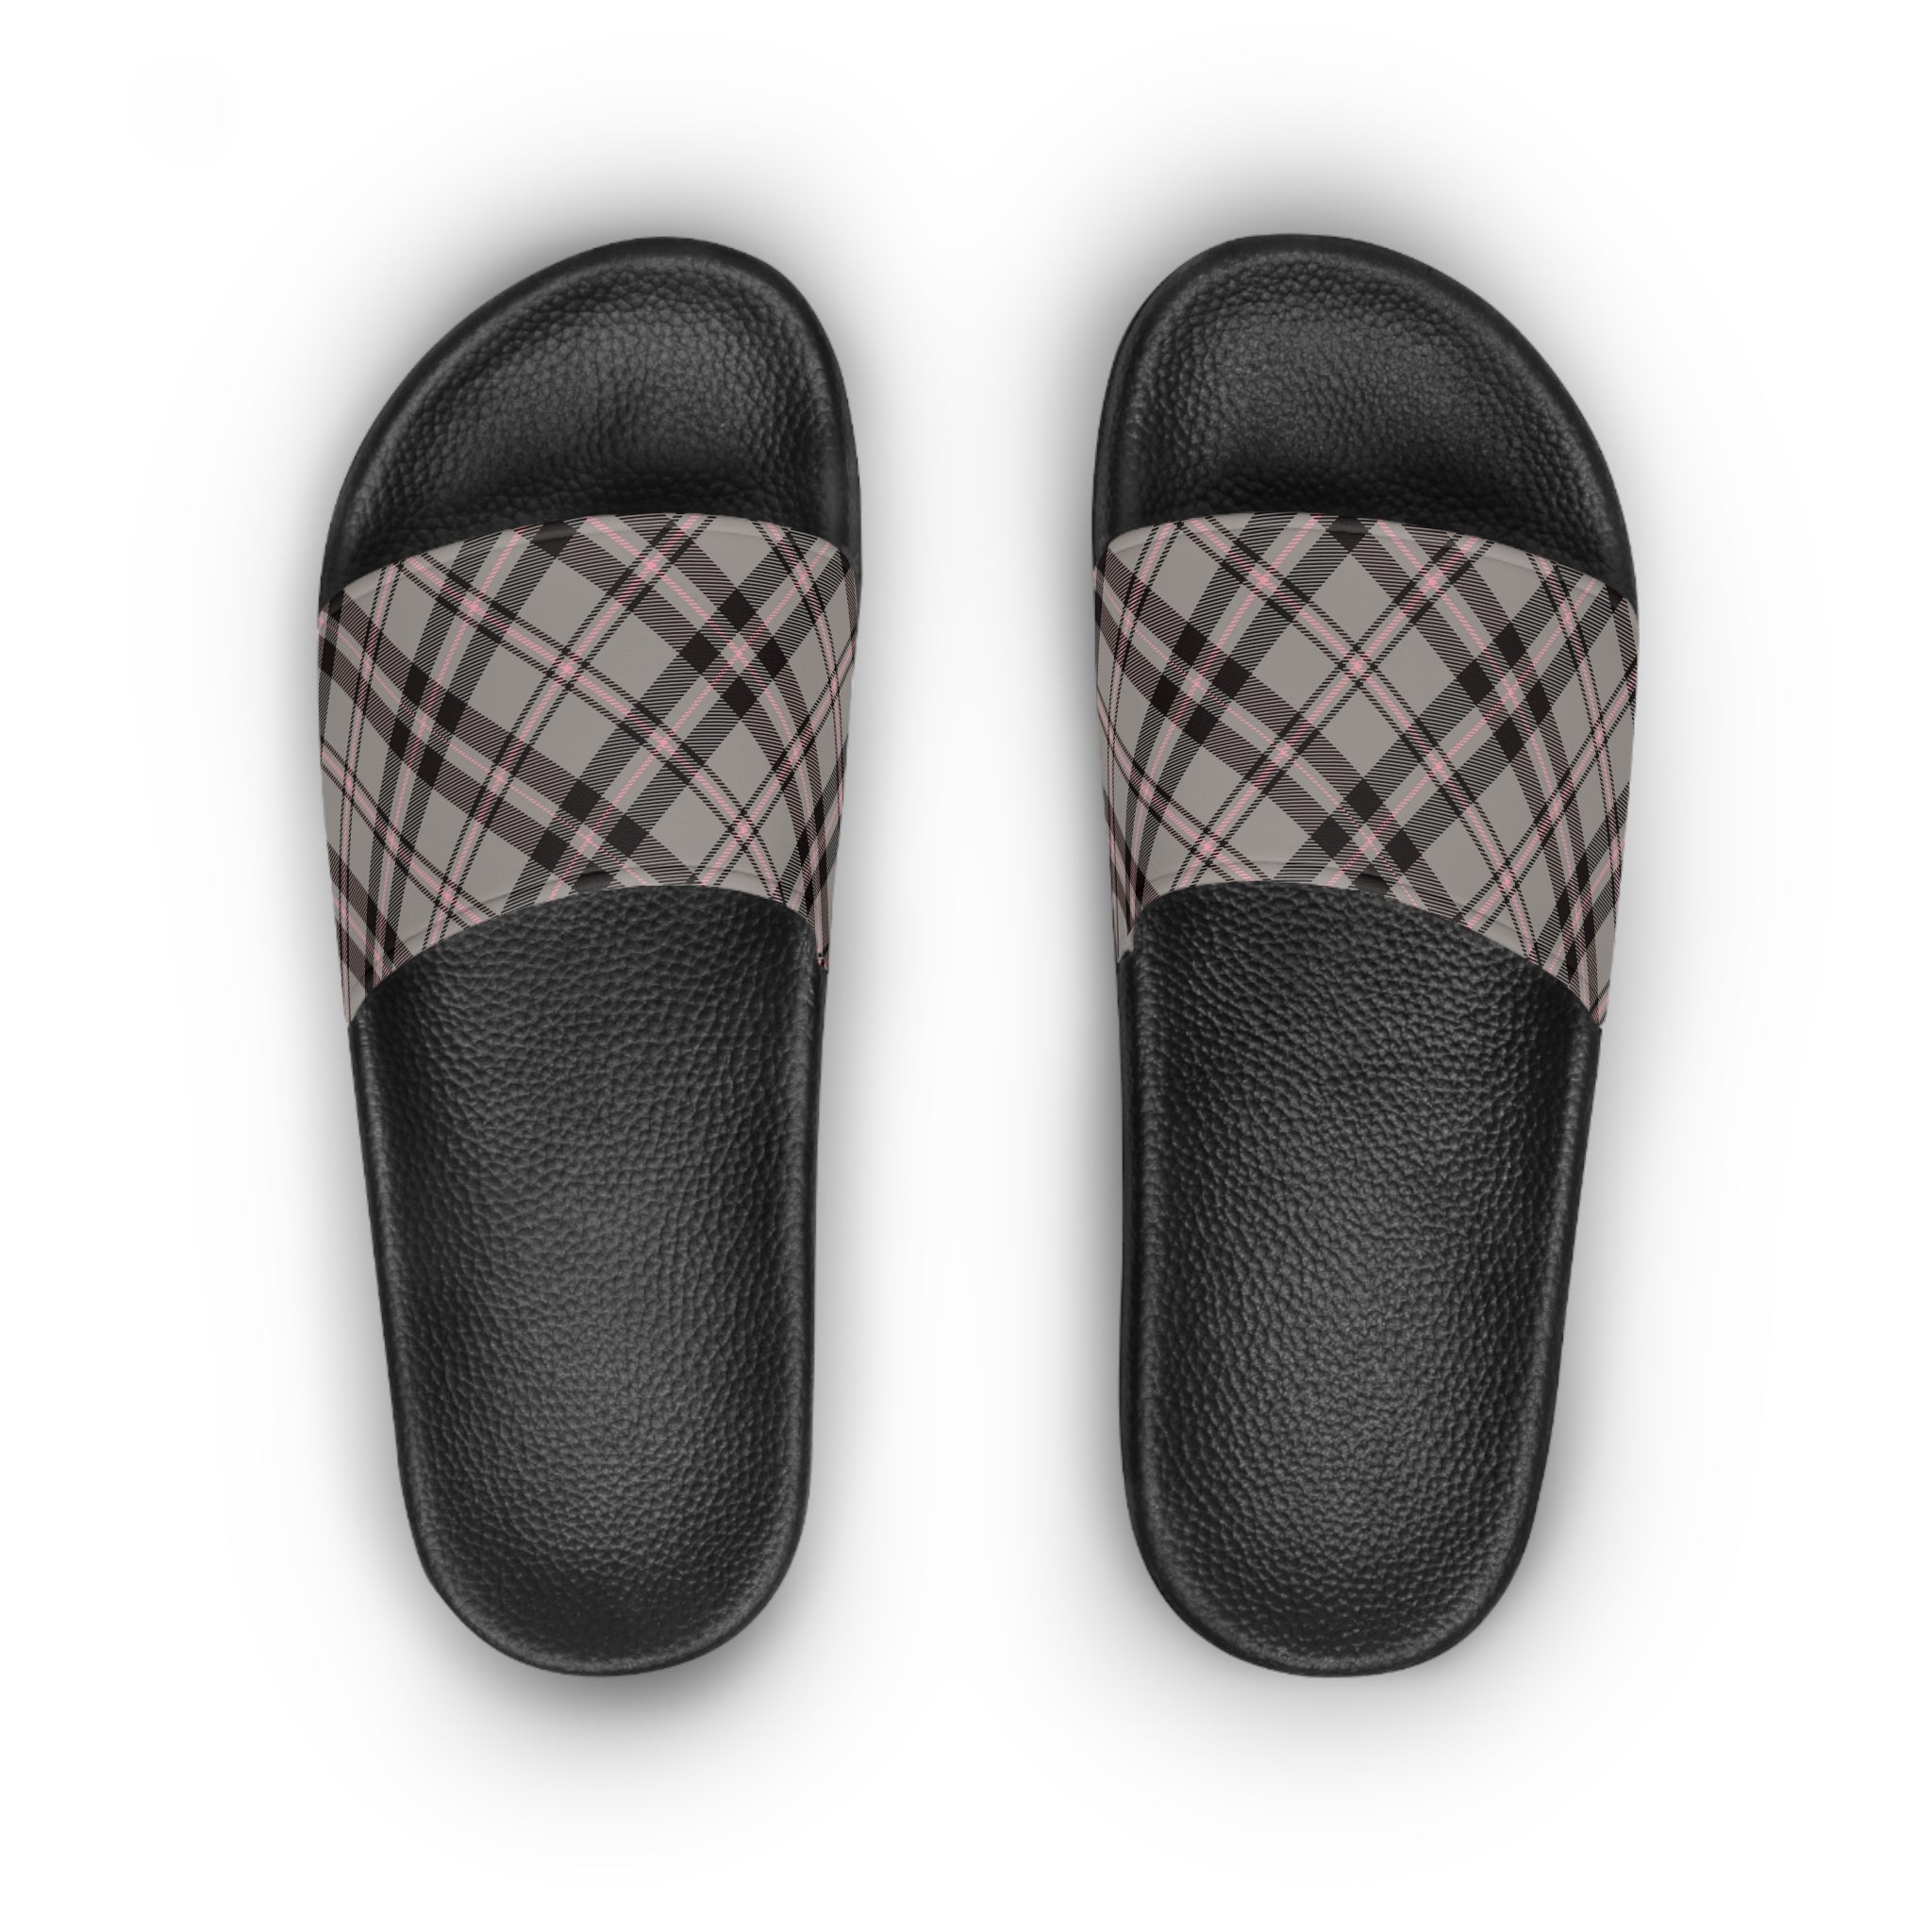  Abby Pattern in Gray and Pink Women's Slide Sandals, Slide Sandals for Women, Plaid Slip Ons ShoesBlacksoleUS9